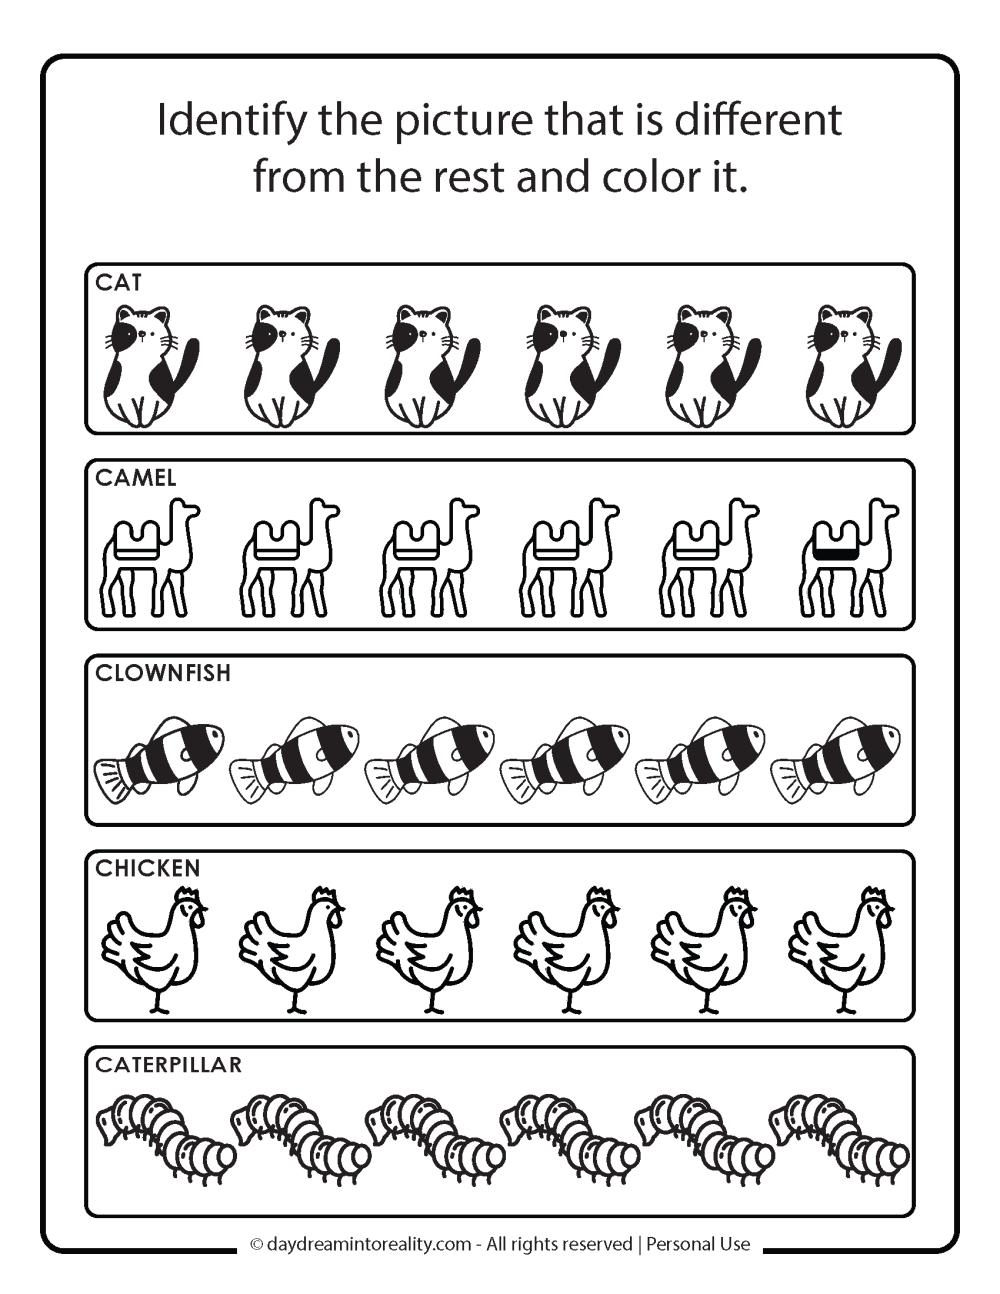 Identify the Different Image - Letter C worksheet free printable